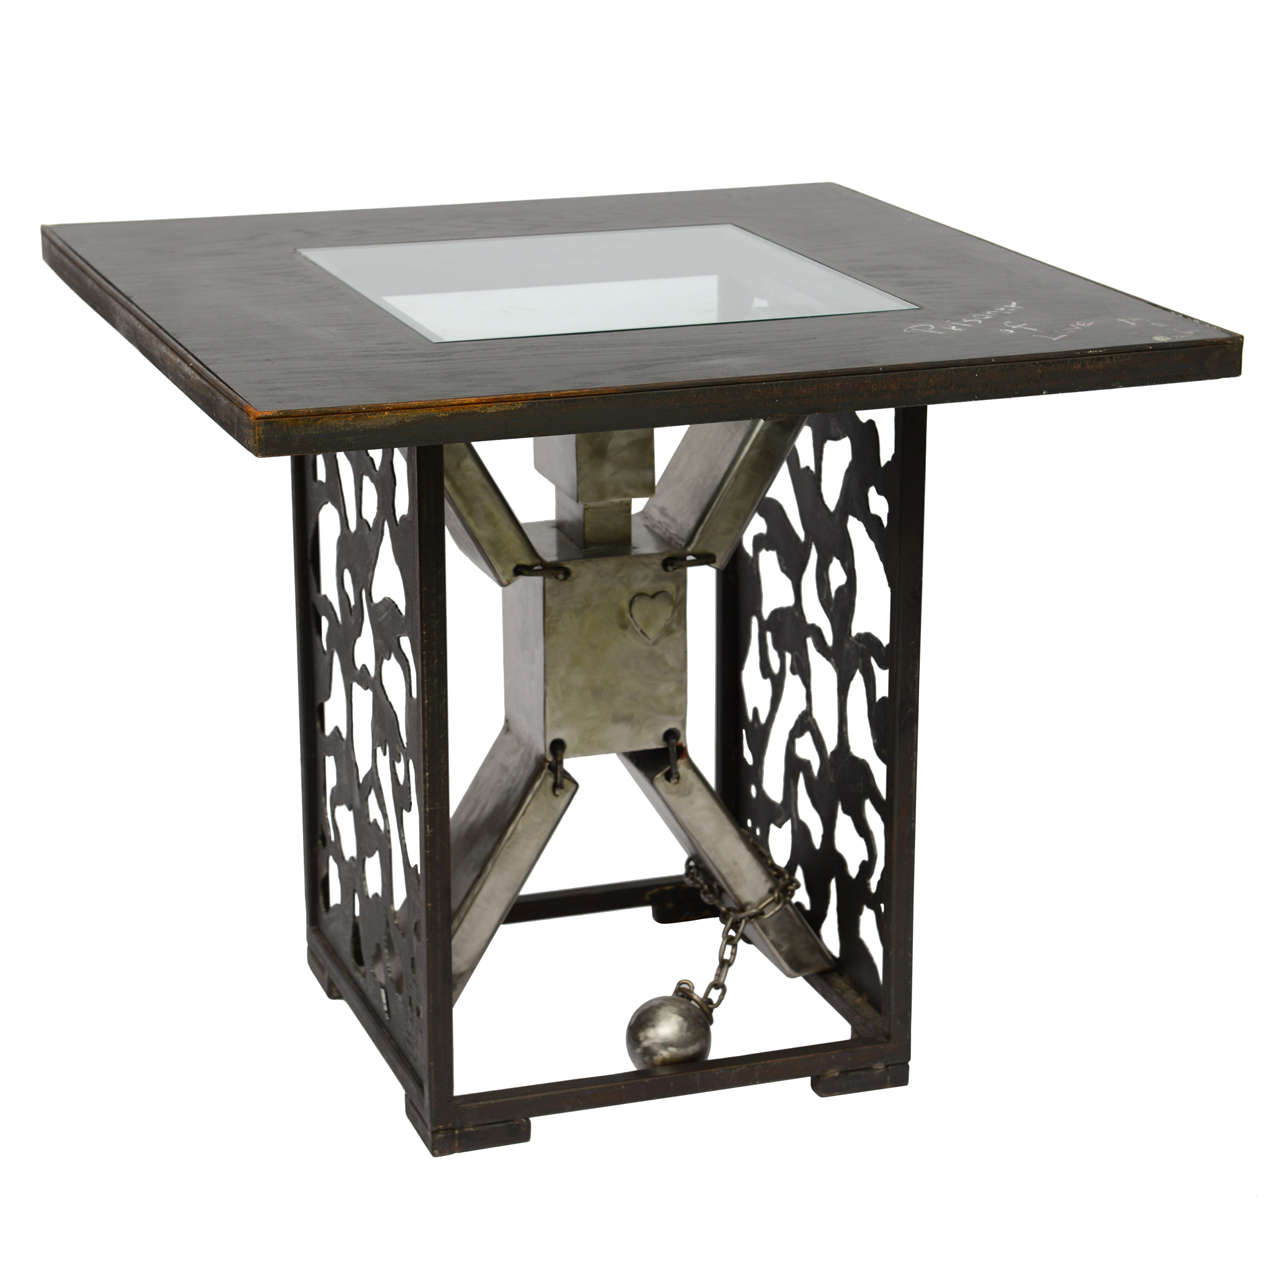 Dining or Center Table- Ronn Jaffe Ltd. Edition Design 'Survival' Functional Art For Sale